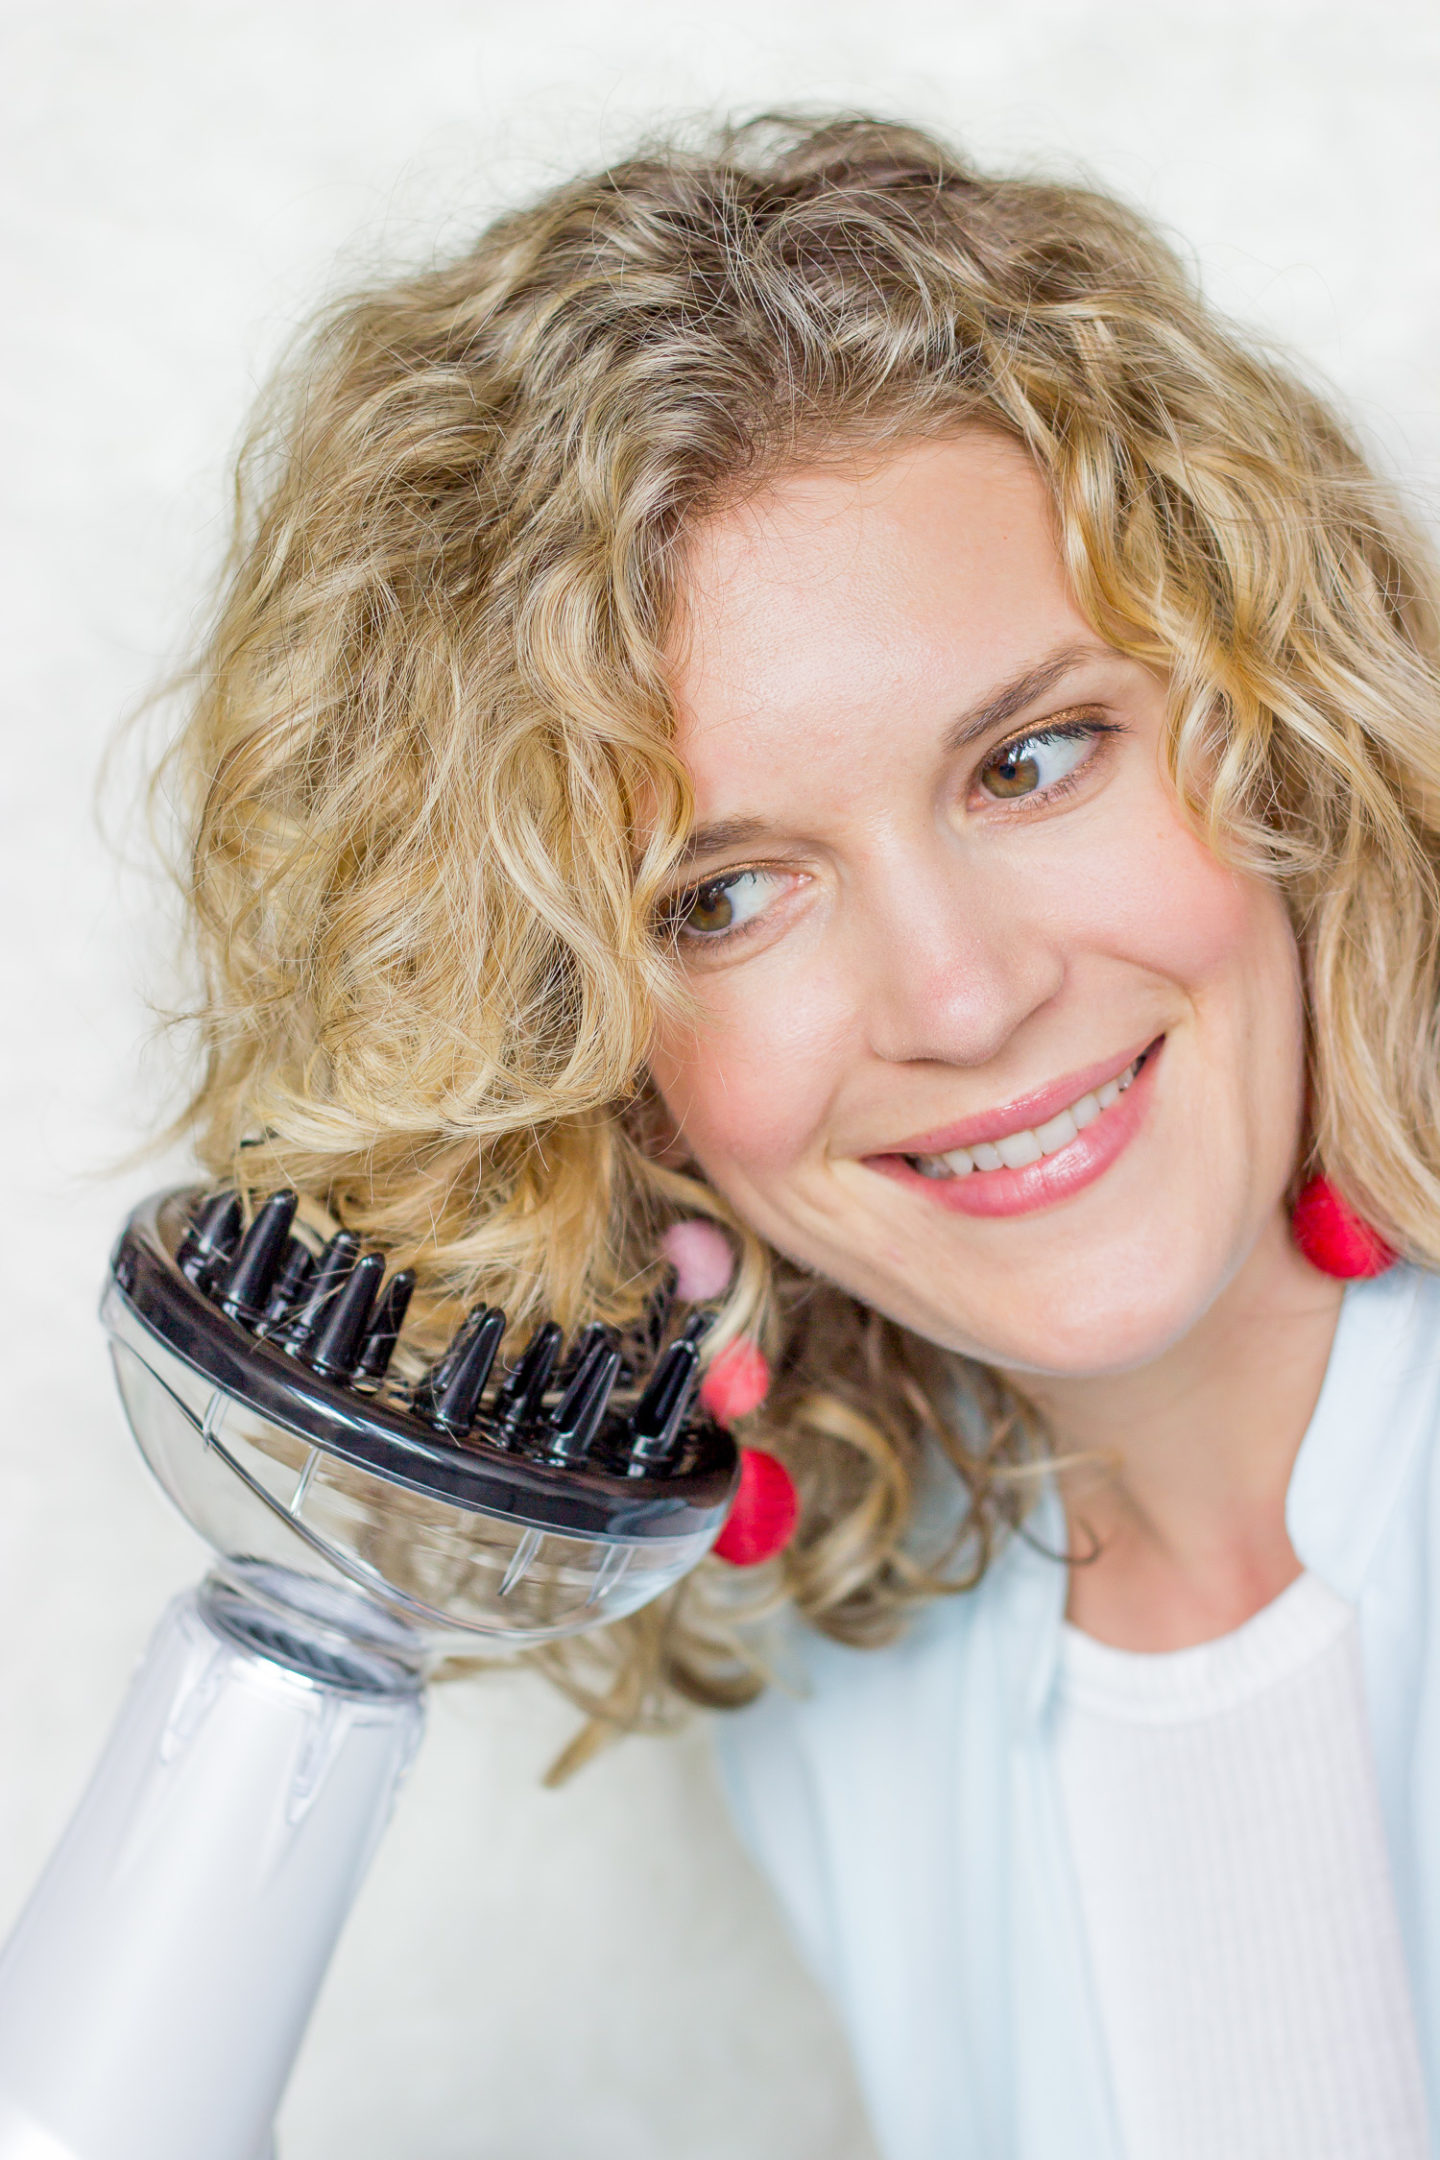 HOW TO DIFFUSE CURLY HAIR